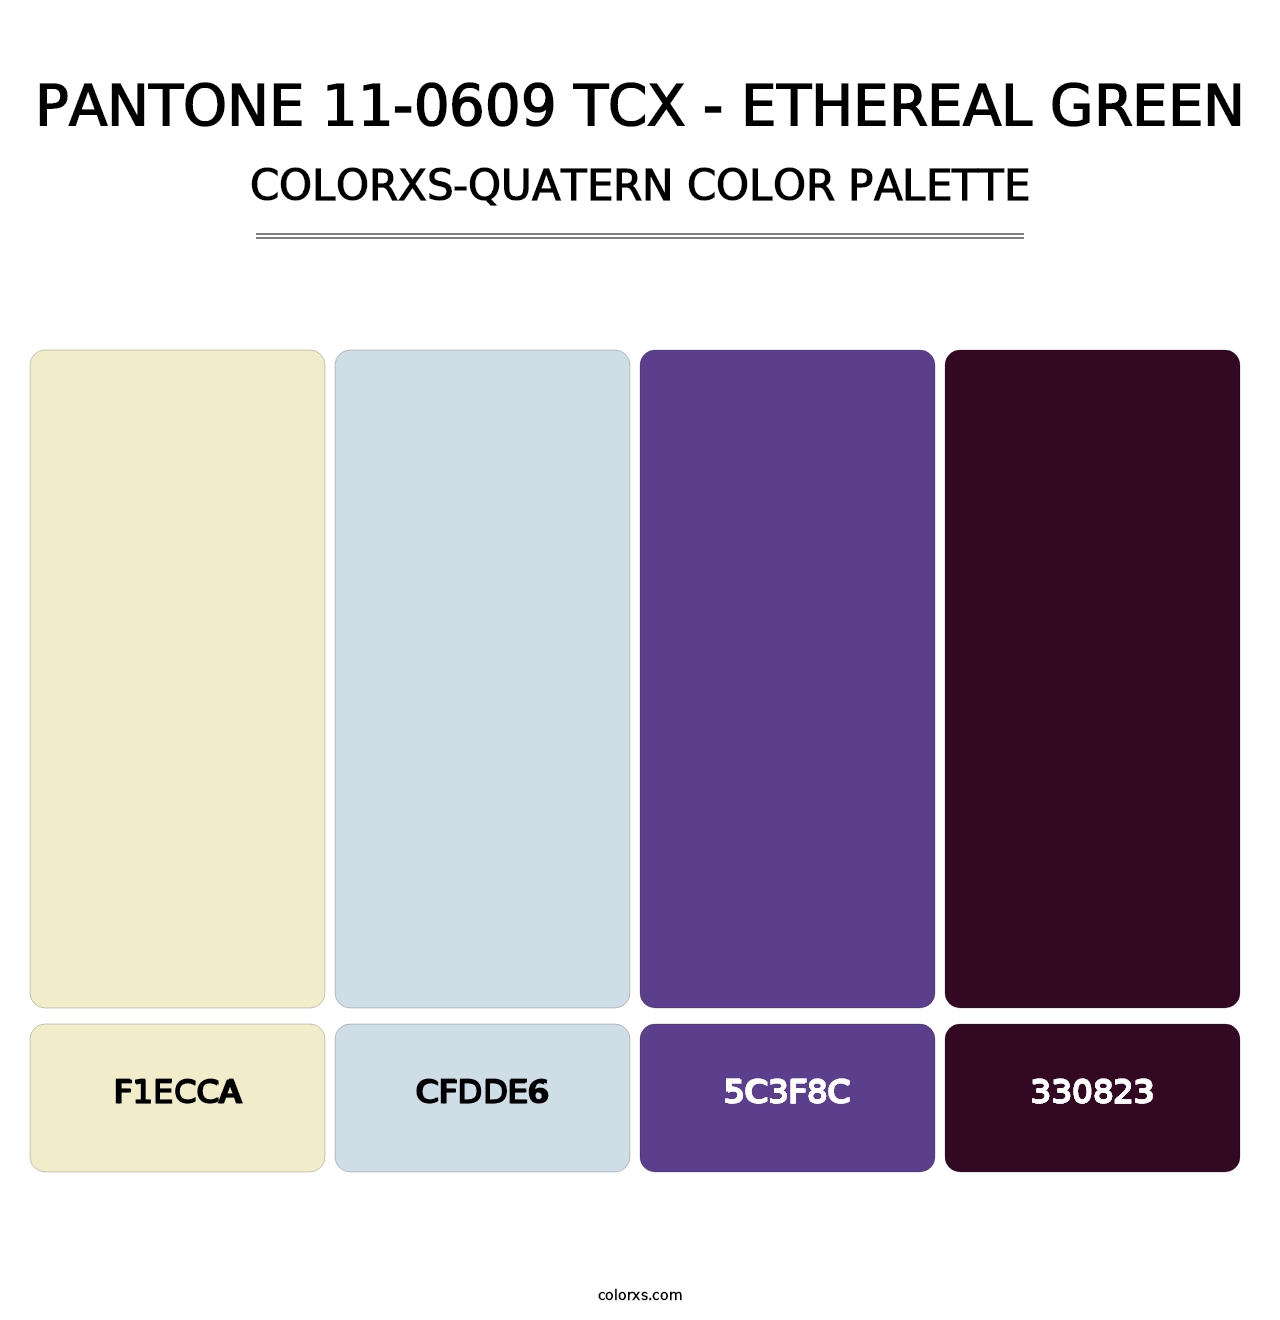 PANTONE 11-0609 TCX - Ethereal Green - Colorxs Quatern Palette